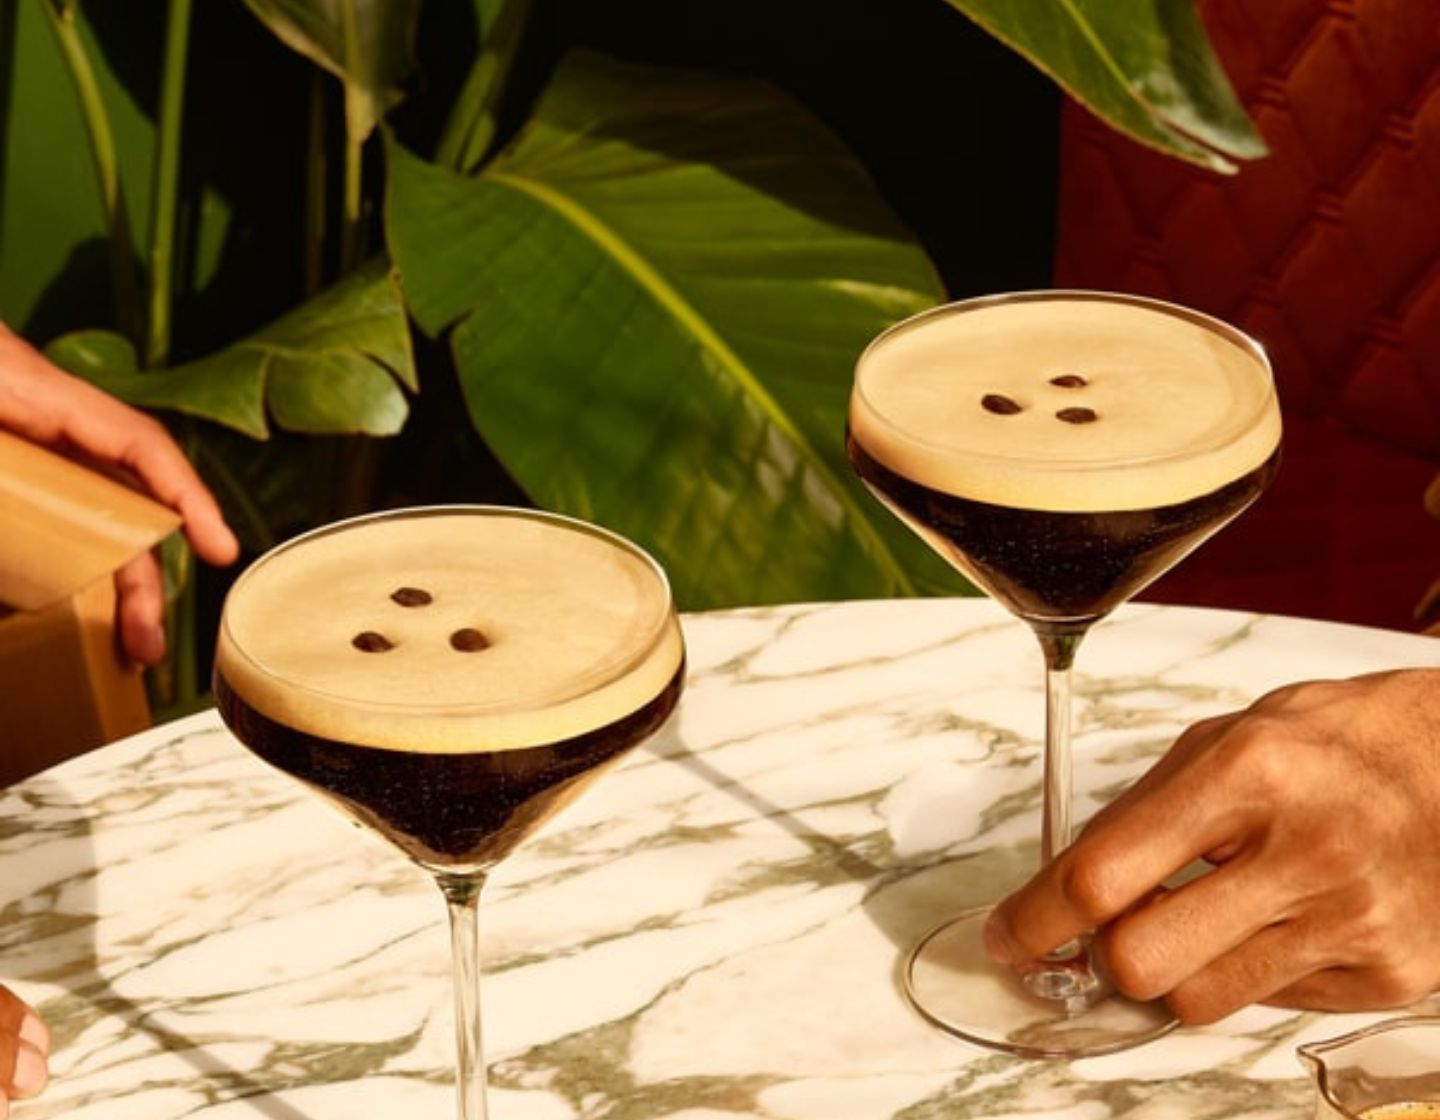 2 espresso martinis on a tsble with hands reaching